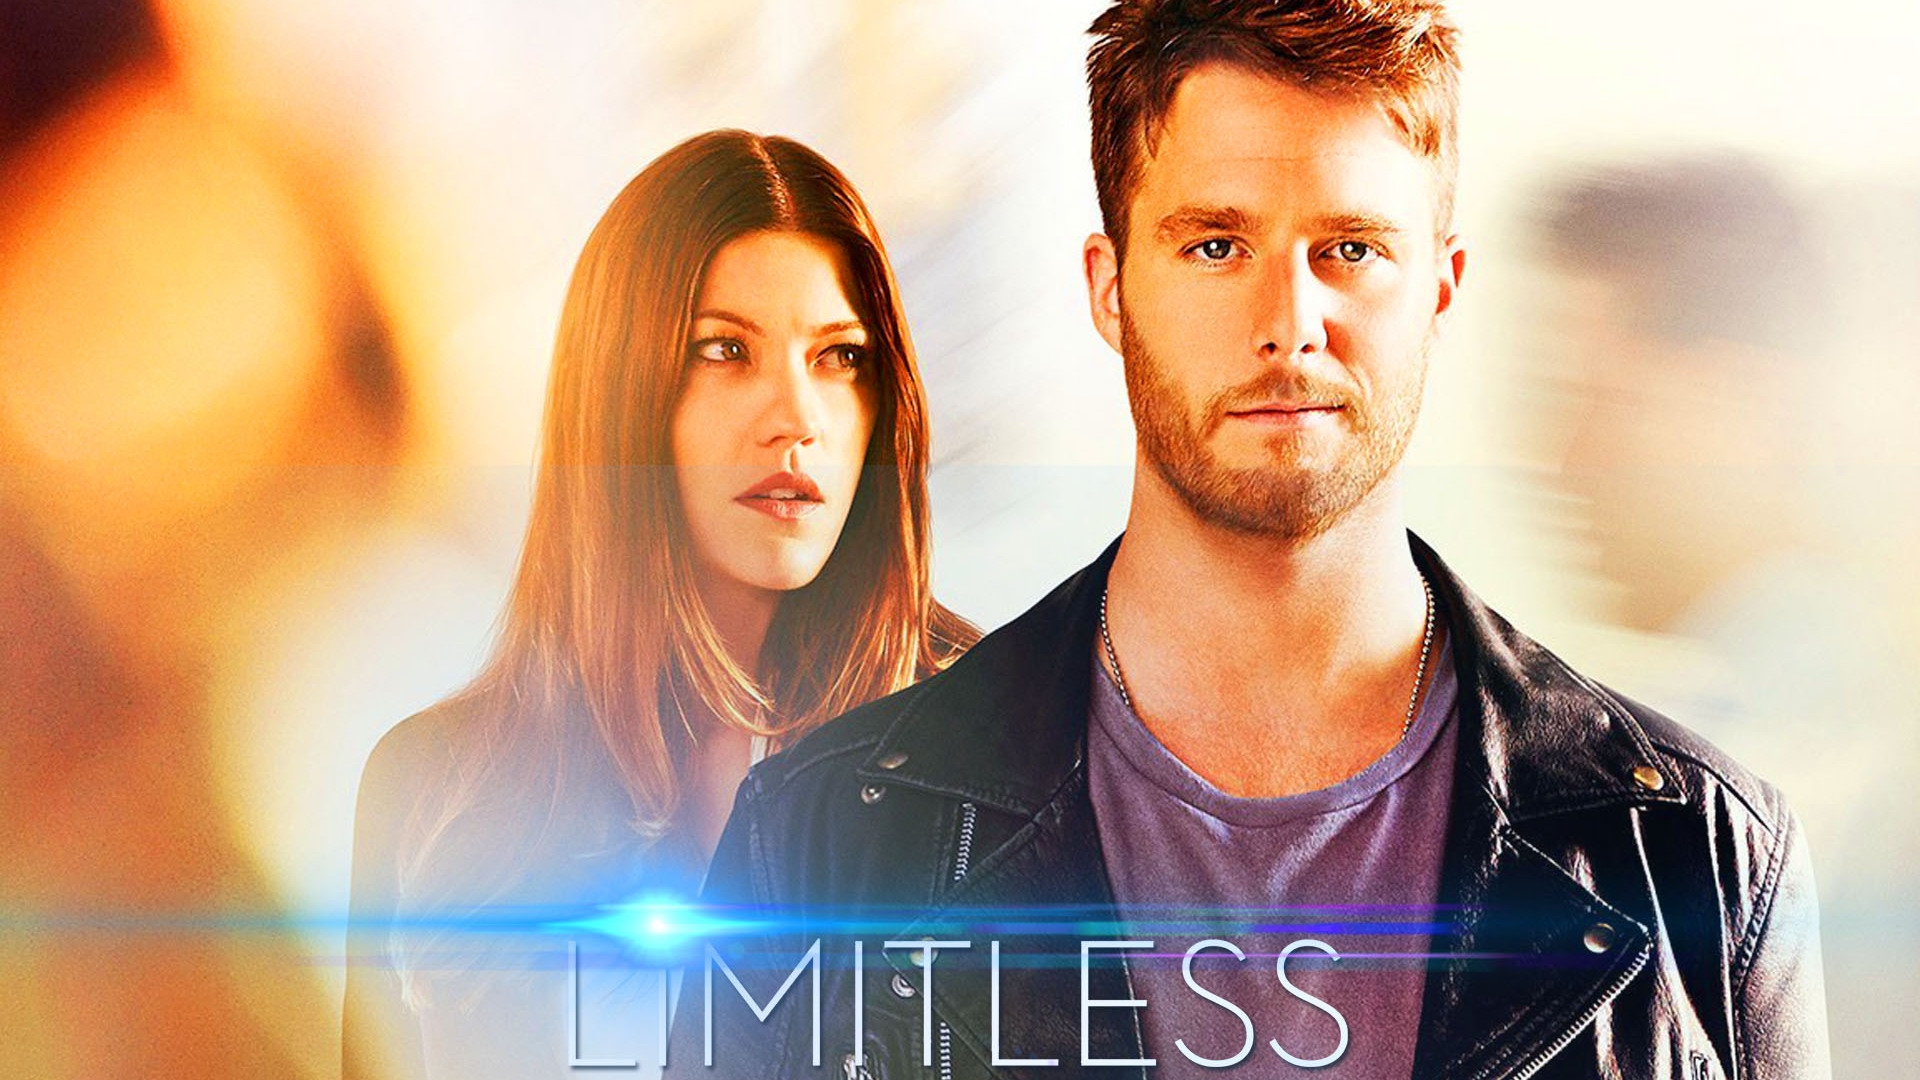 Limitless TV Show Poster for 1920 x 1080 HDTV 1080p resolution